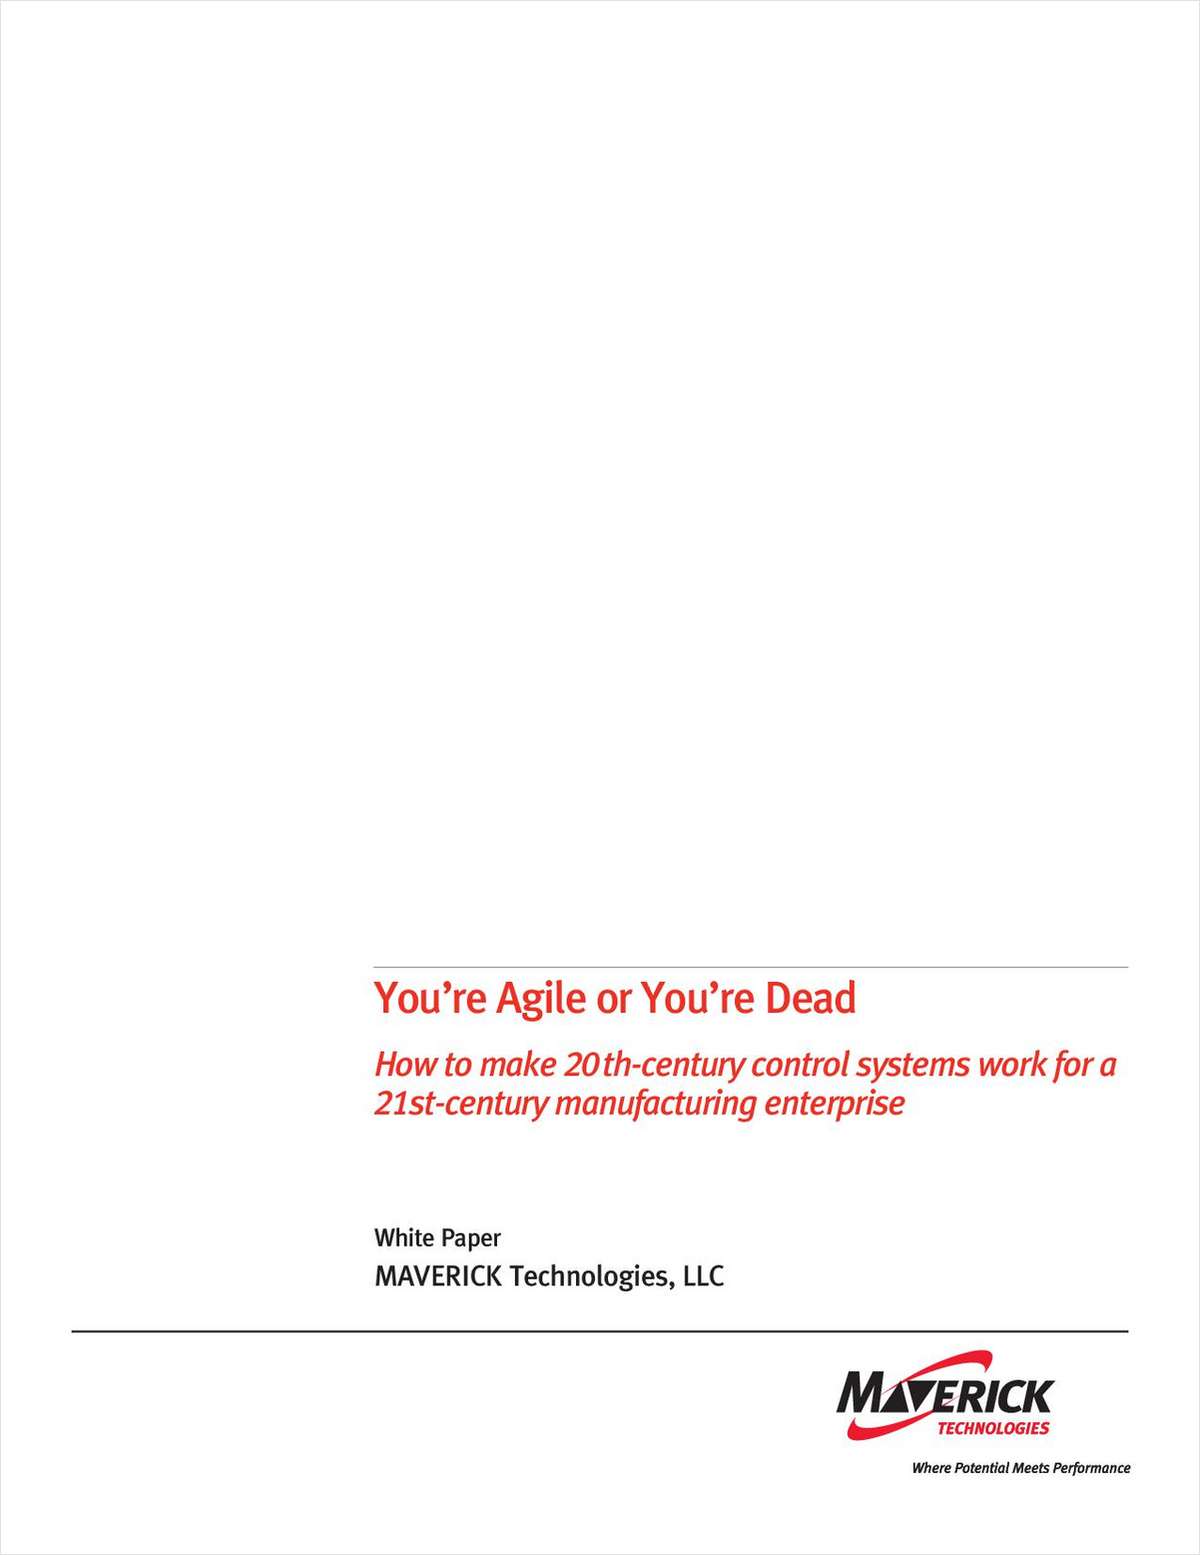 DCS White Paper: You're Agile or You're Dead